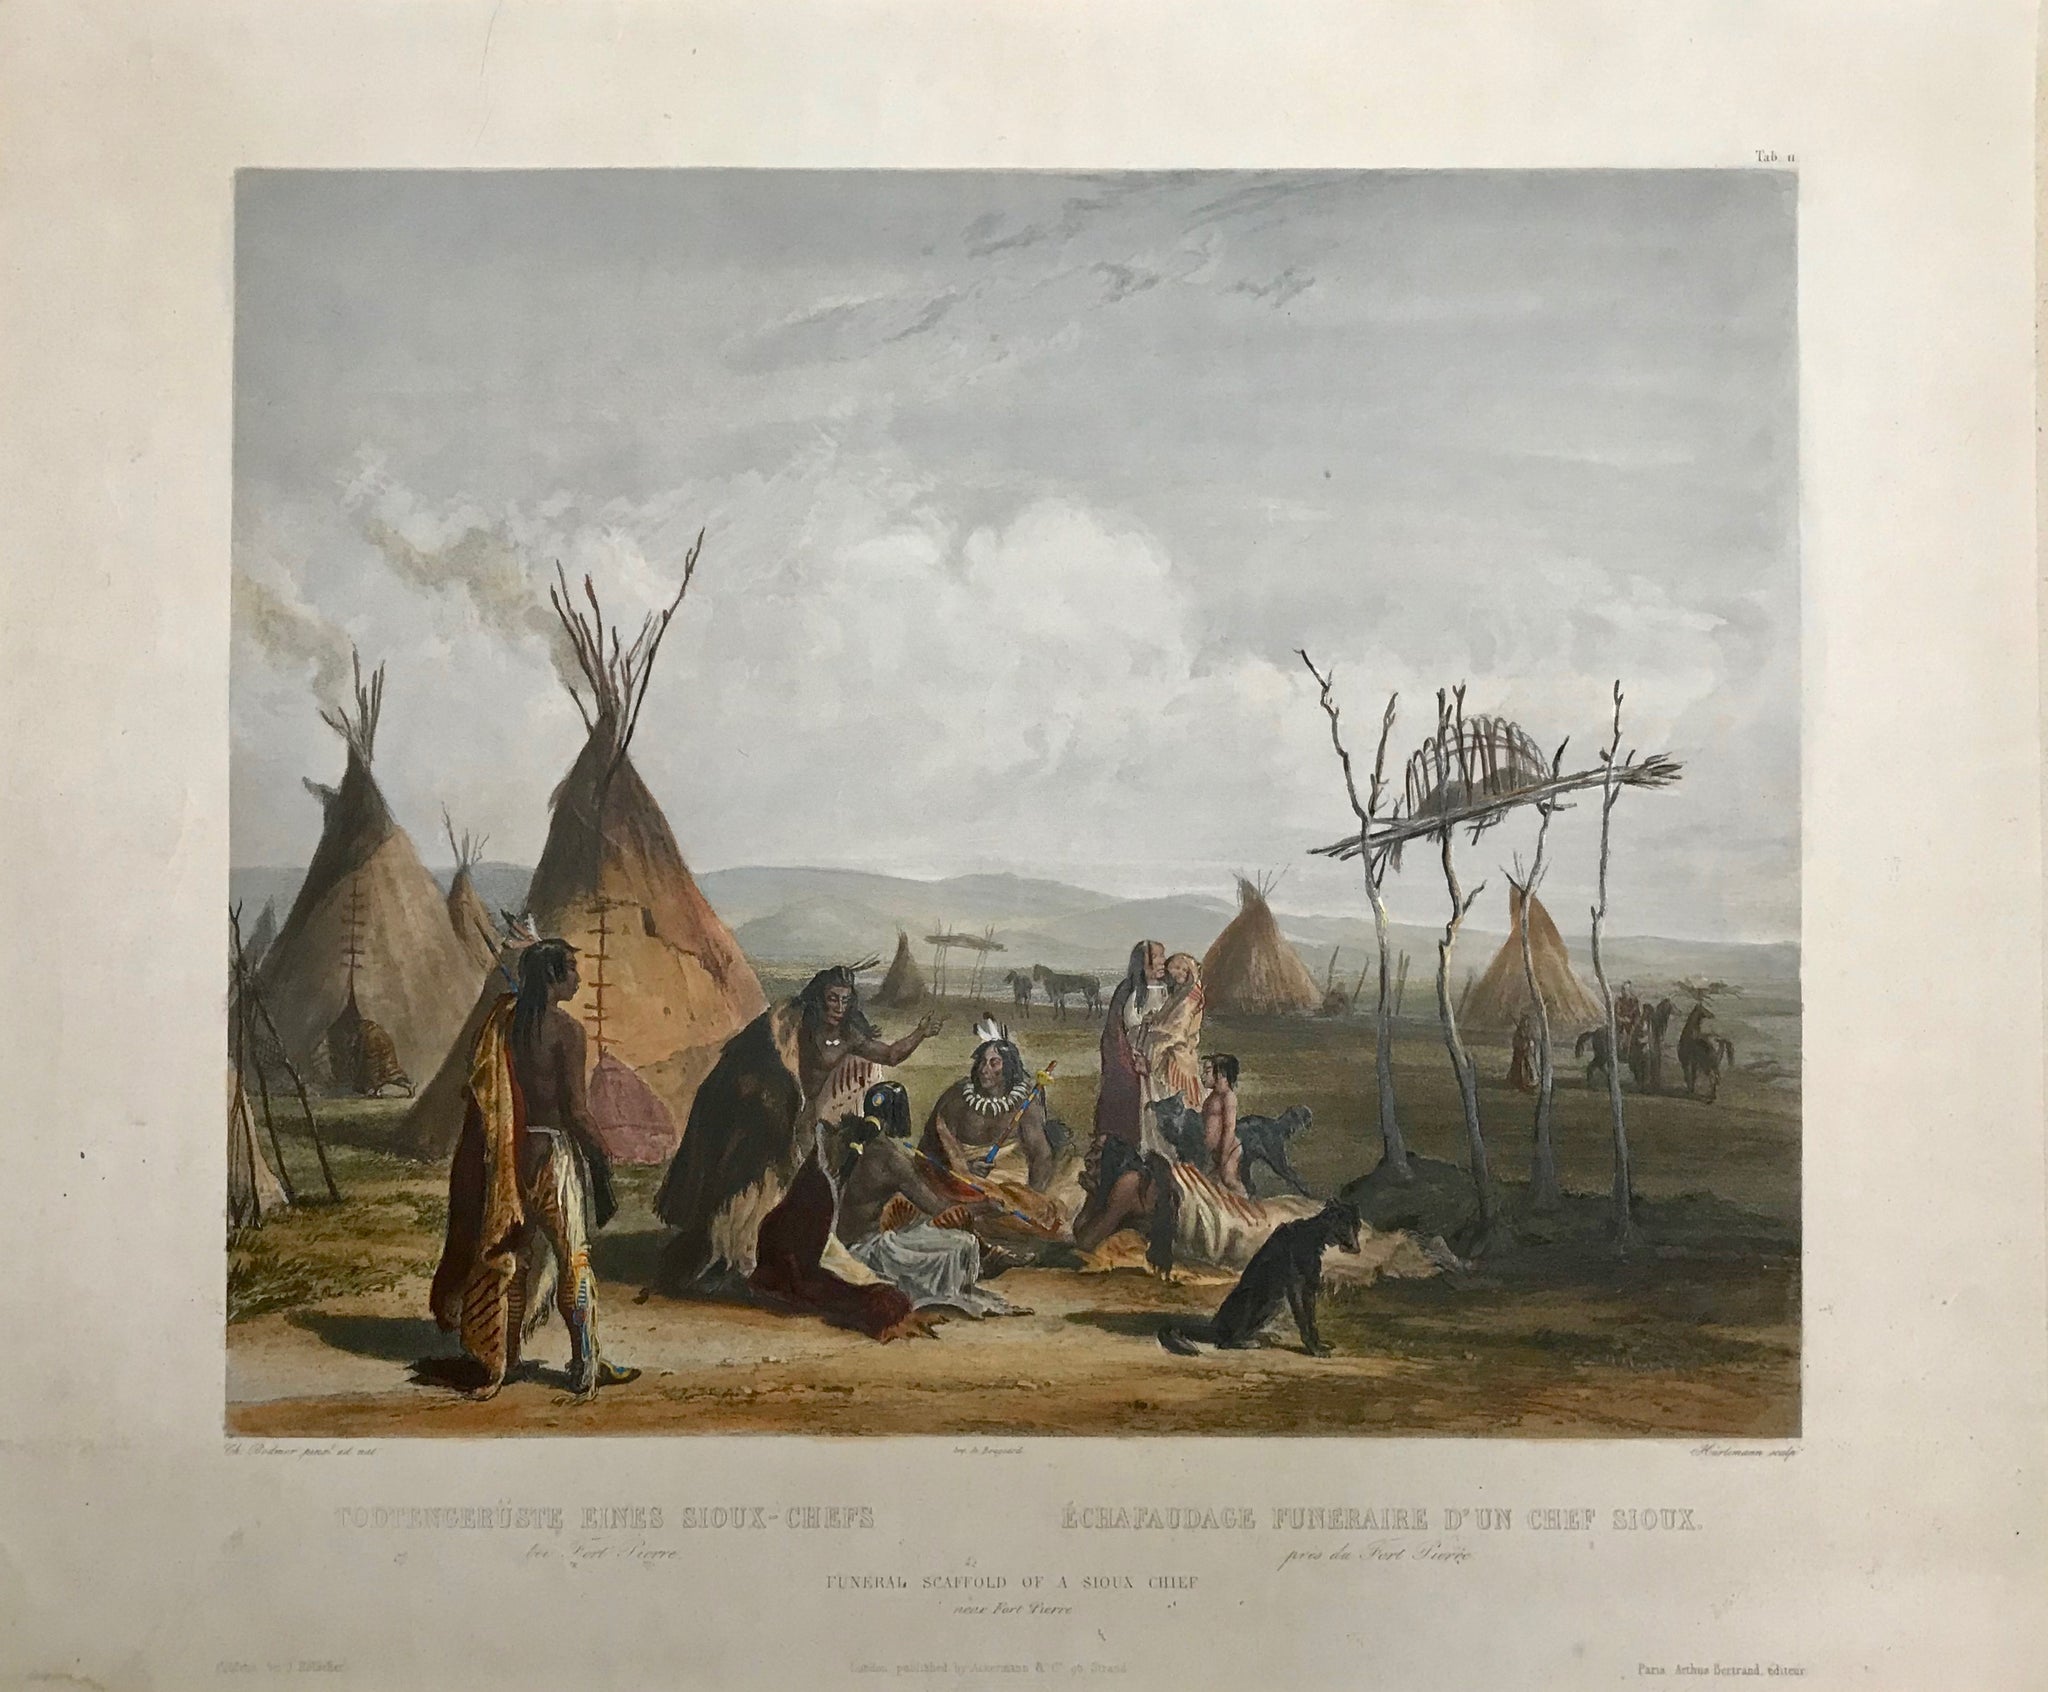 "Todtengerüste eines Sioux-Chefs bei Fort Pierre "  "Echafaudage Funeraire D'Un Chef Sioux pres du Fort Pierre"  "Funeral Scaffold of a Sioux Chief near Fort Pierre".  Aquatint etching by Huerlimann after the painting by Carl Bodmer (1809-1893)  Original hand coloring heightened with gum arabic.See details.  Published as Plate 11 in:  "Reise in das Innere Nord-America in den Jahren 1832 bis 1834"